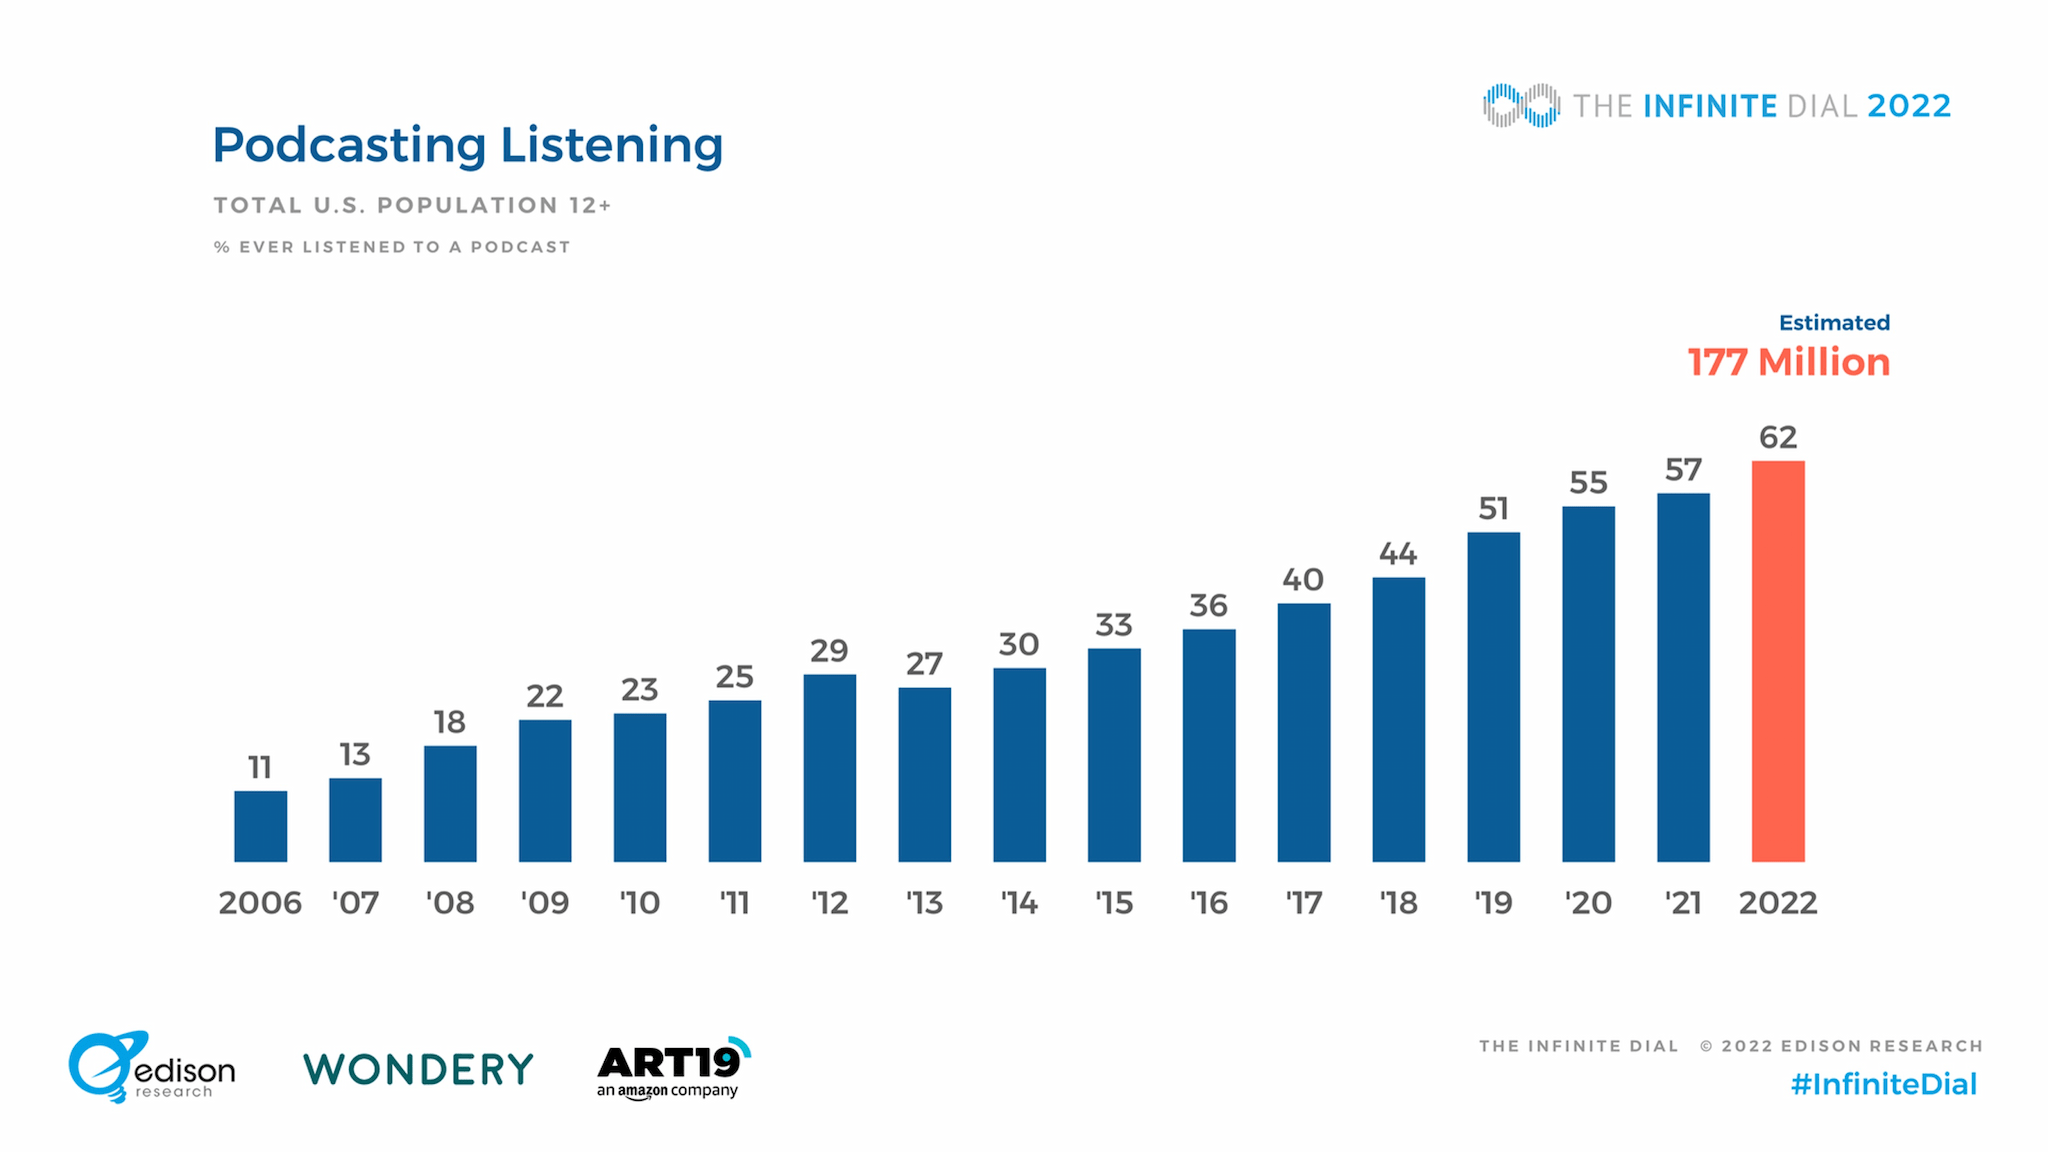 Share of Ear listening devices mobile